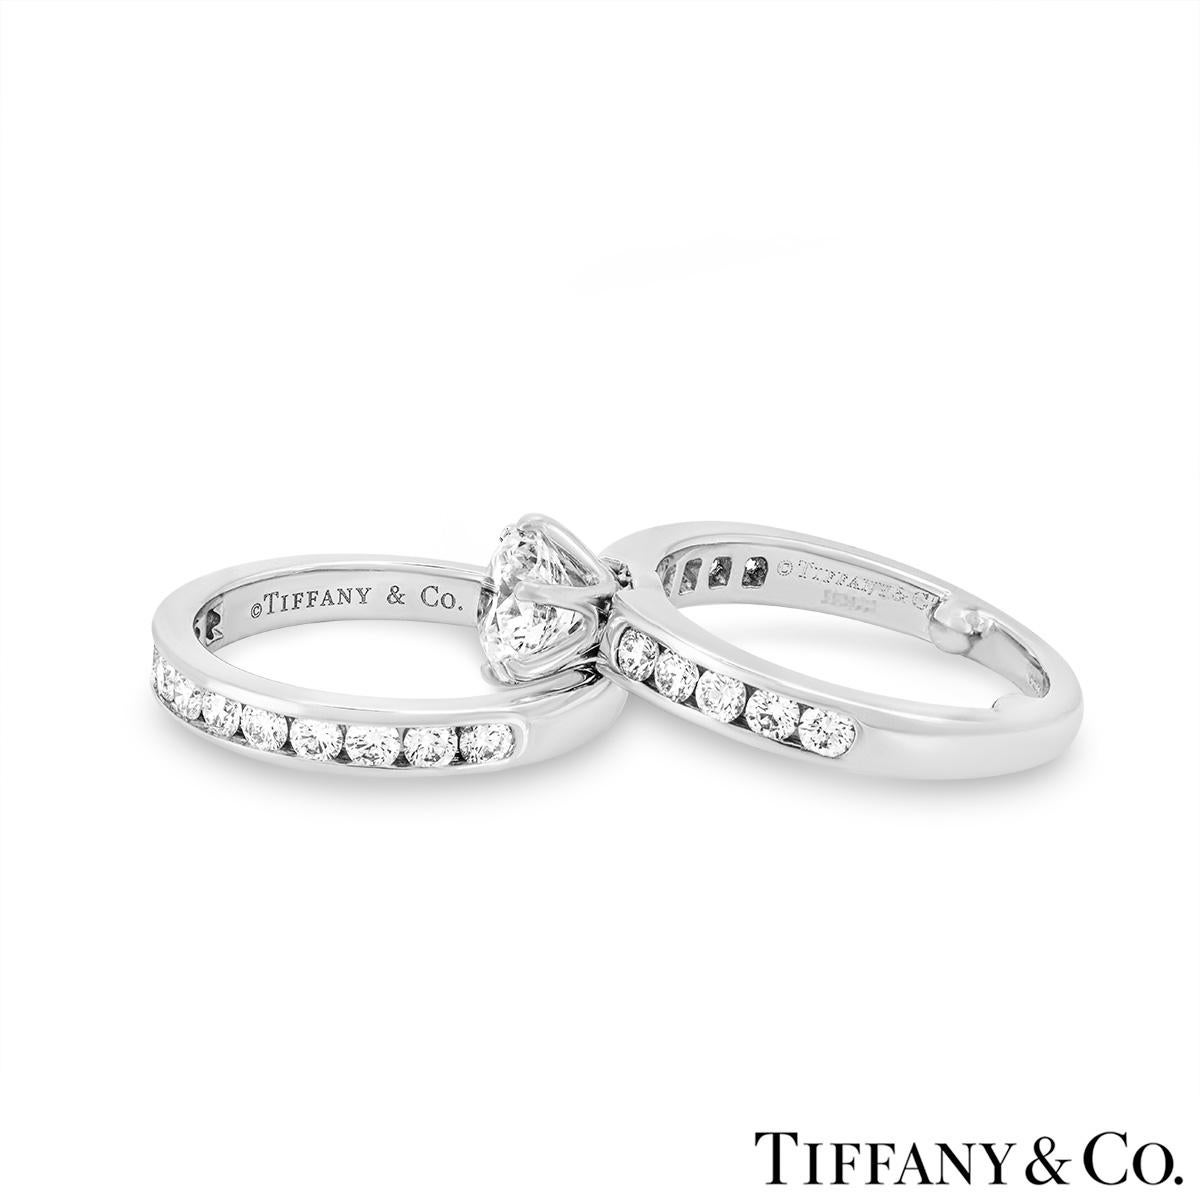 Tiffany & Co. Platinum Diamond Bridal Set 1.03ct H/VS1 In Excellent Condition For Sale In London, GB